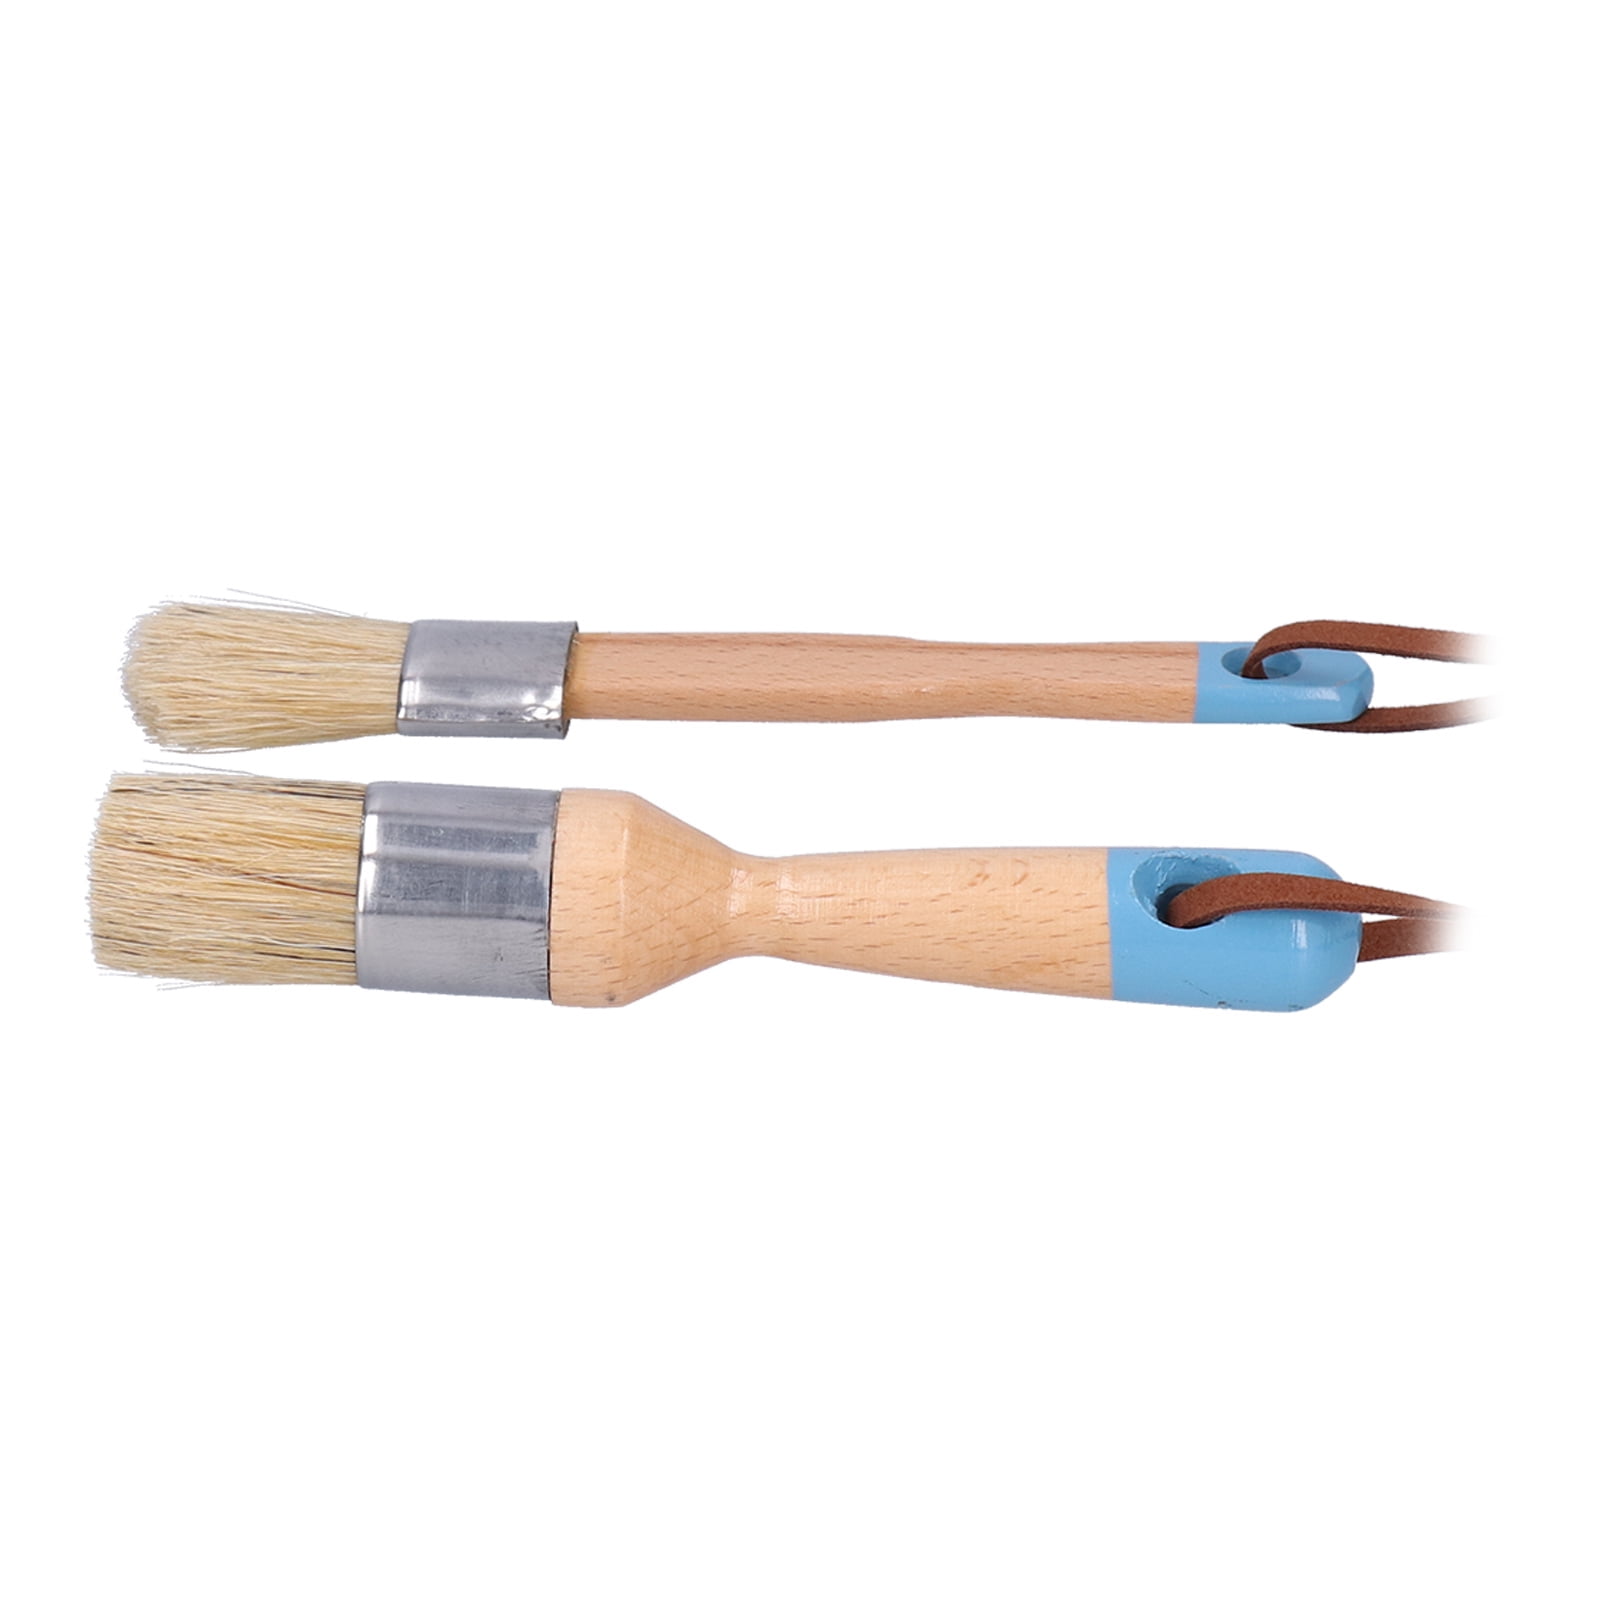 Mister Rui Chalk Paint Brush, Wax Paint Brush Set 3 Pack, Round Paint Brushes Use with All Paints, Natural Bristle Brushes for Painting or Waxing